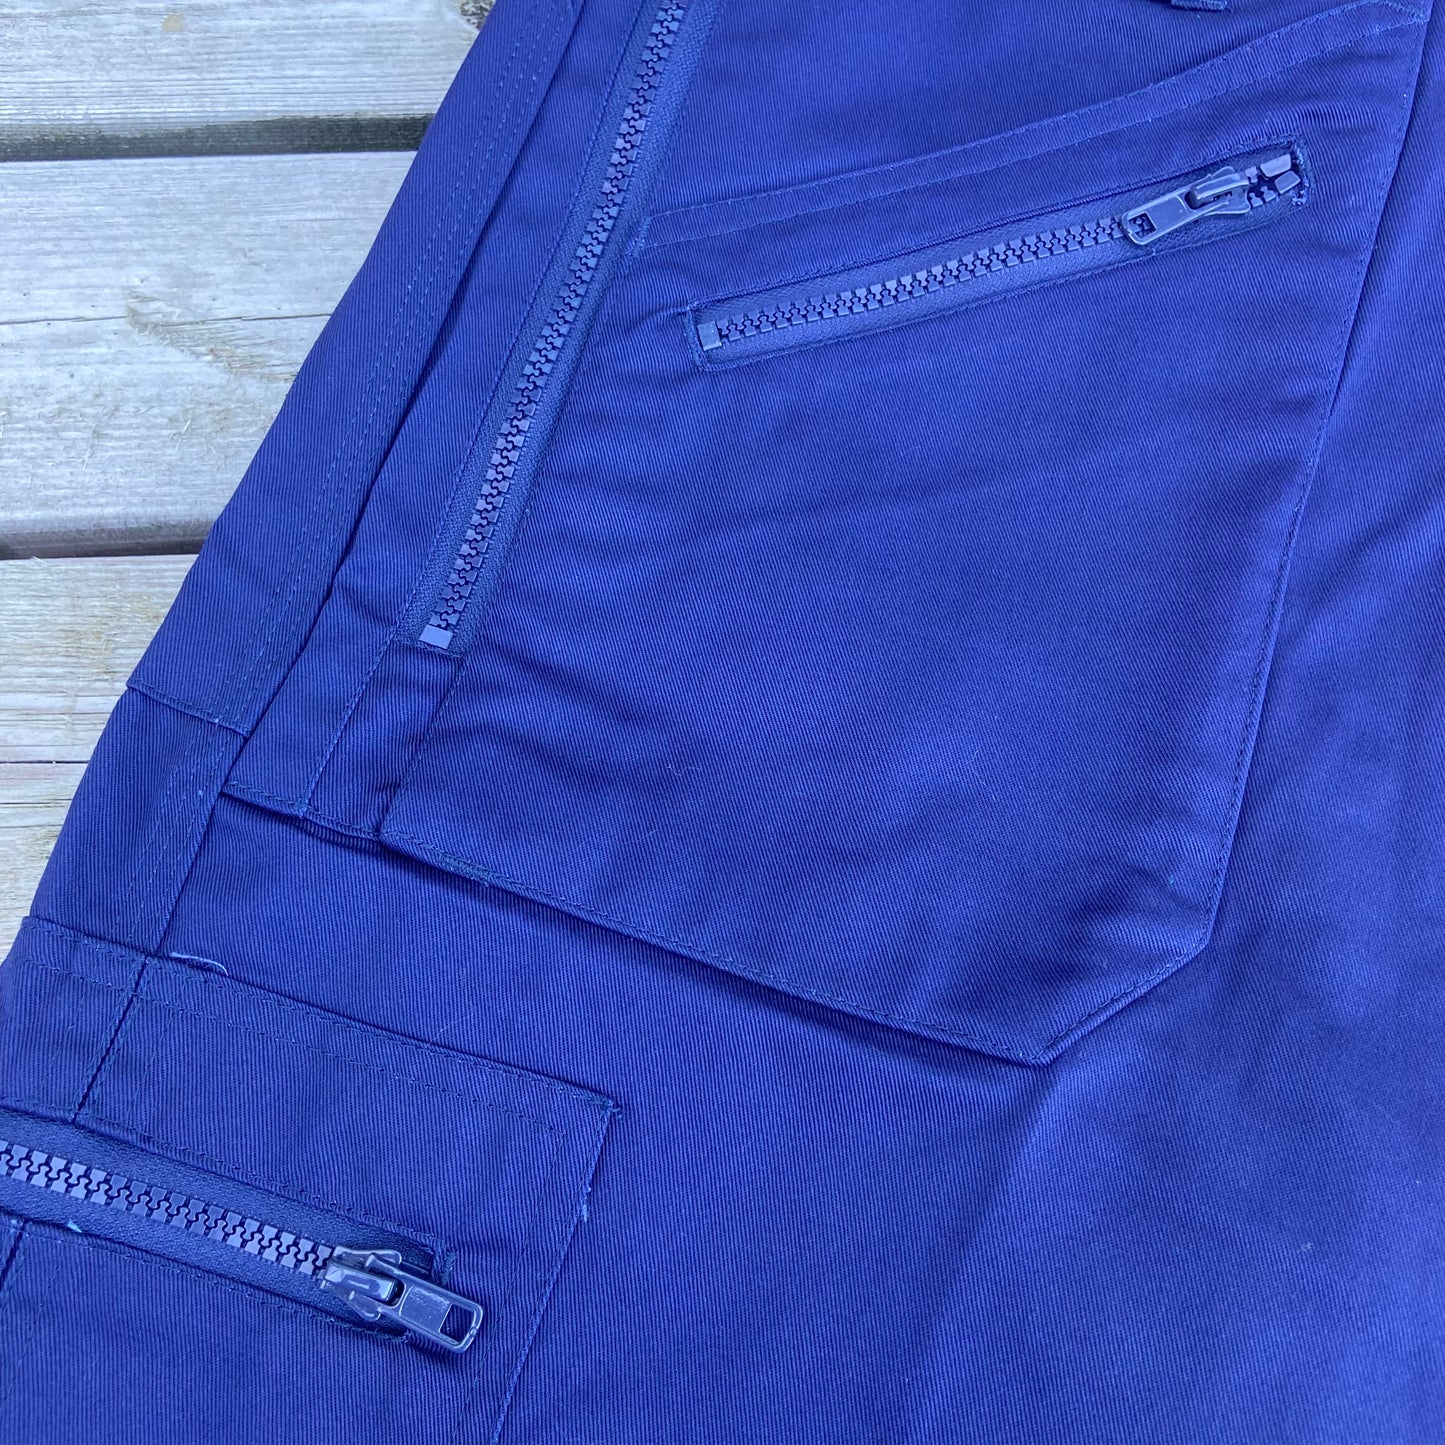 Action Trousers Navy